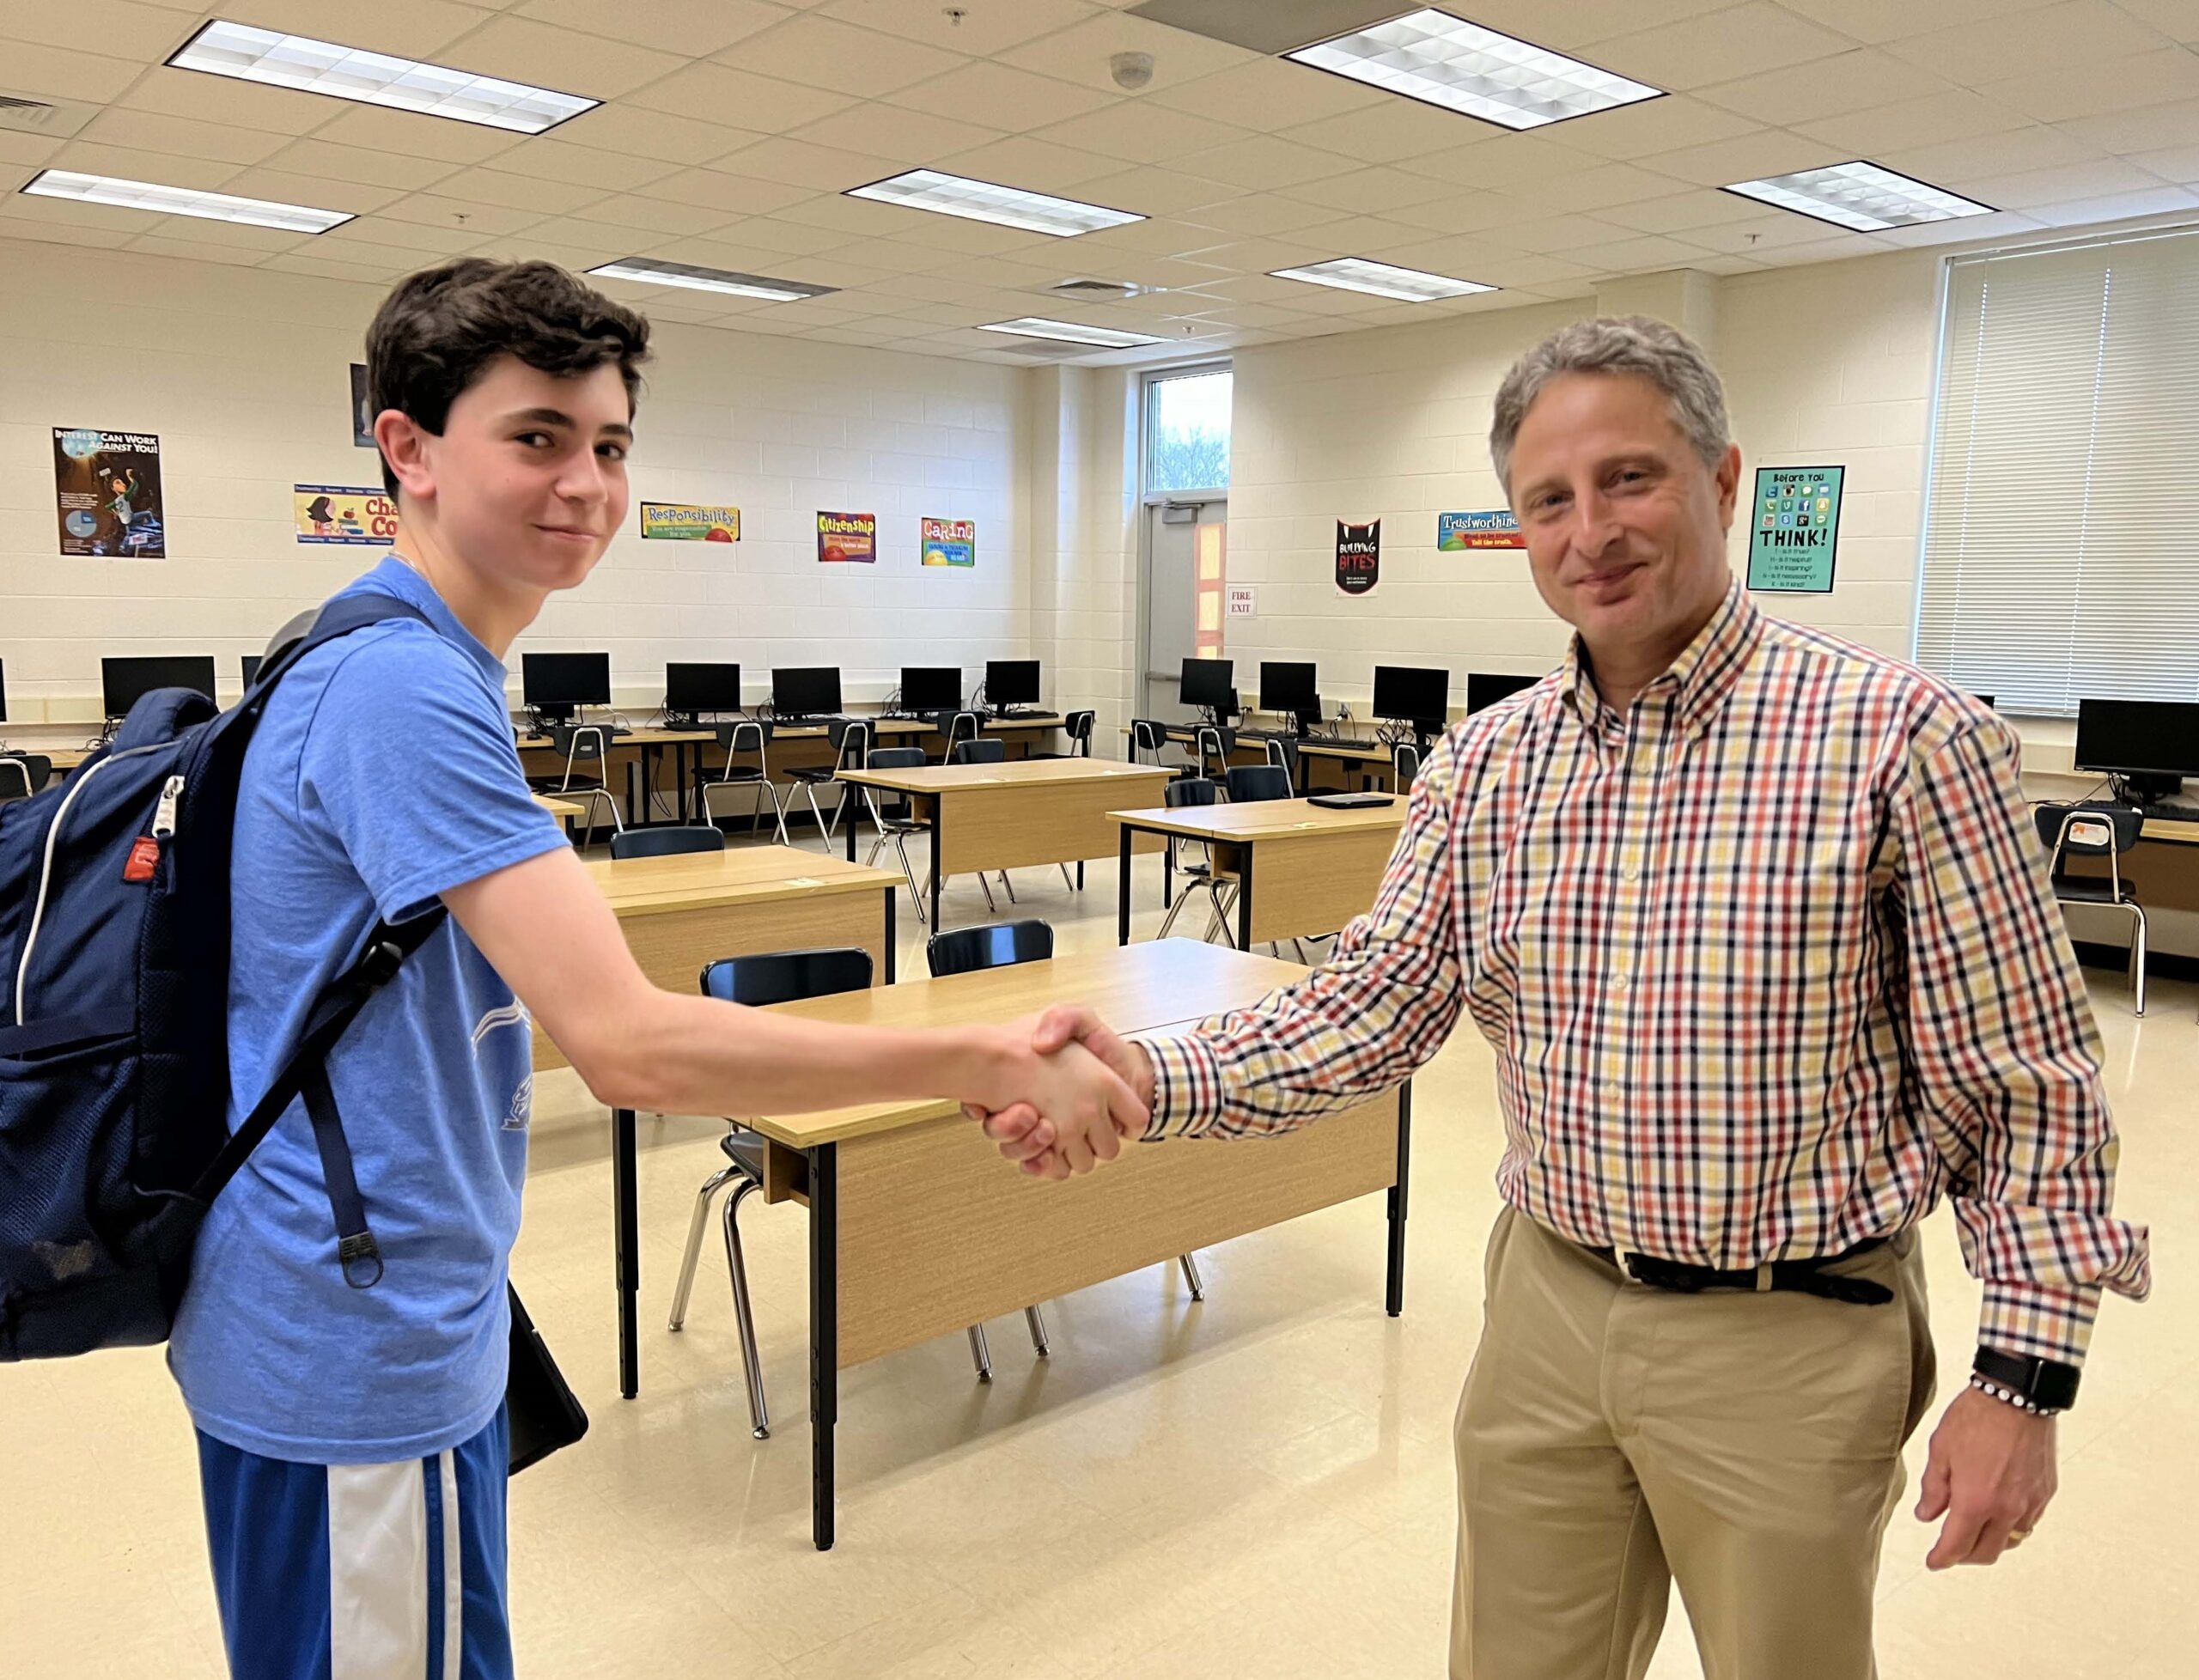 Student and adult shaking hands